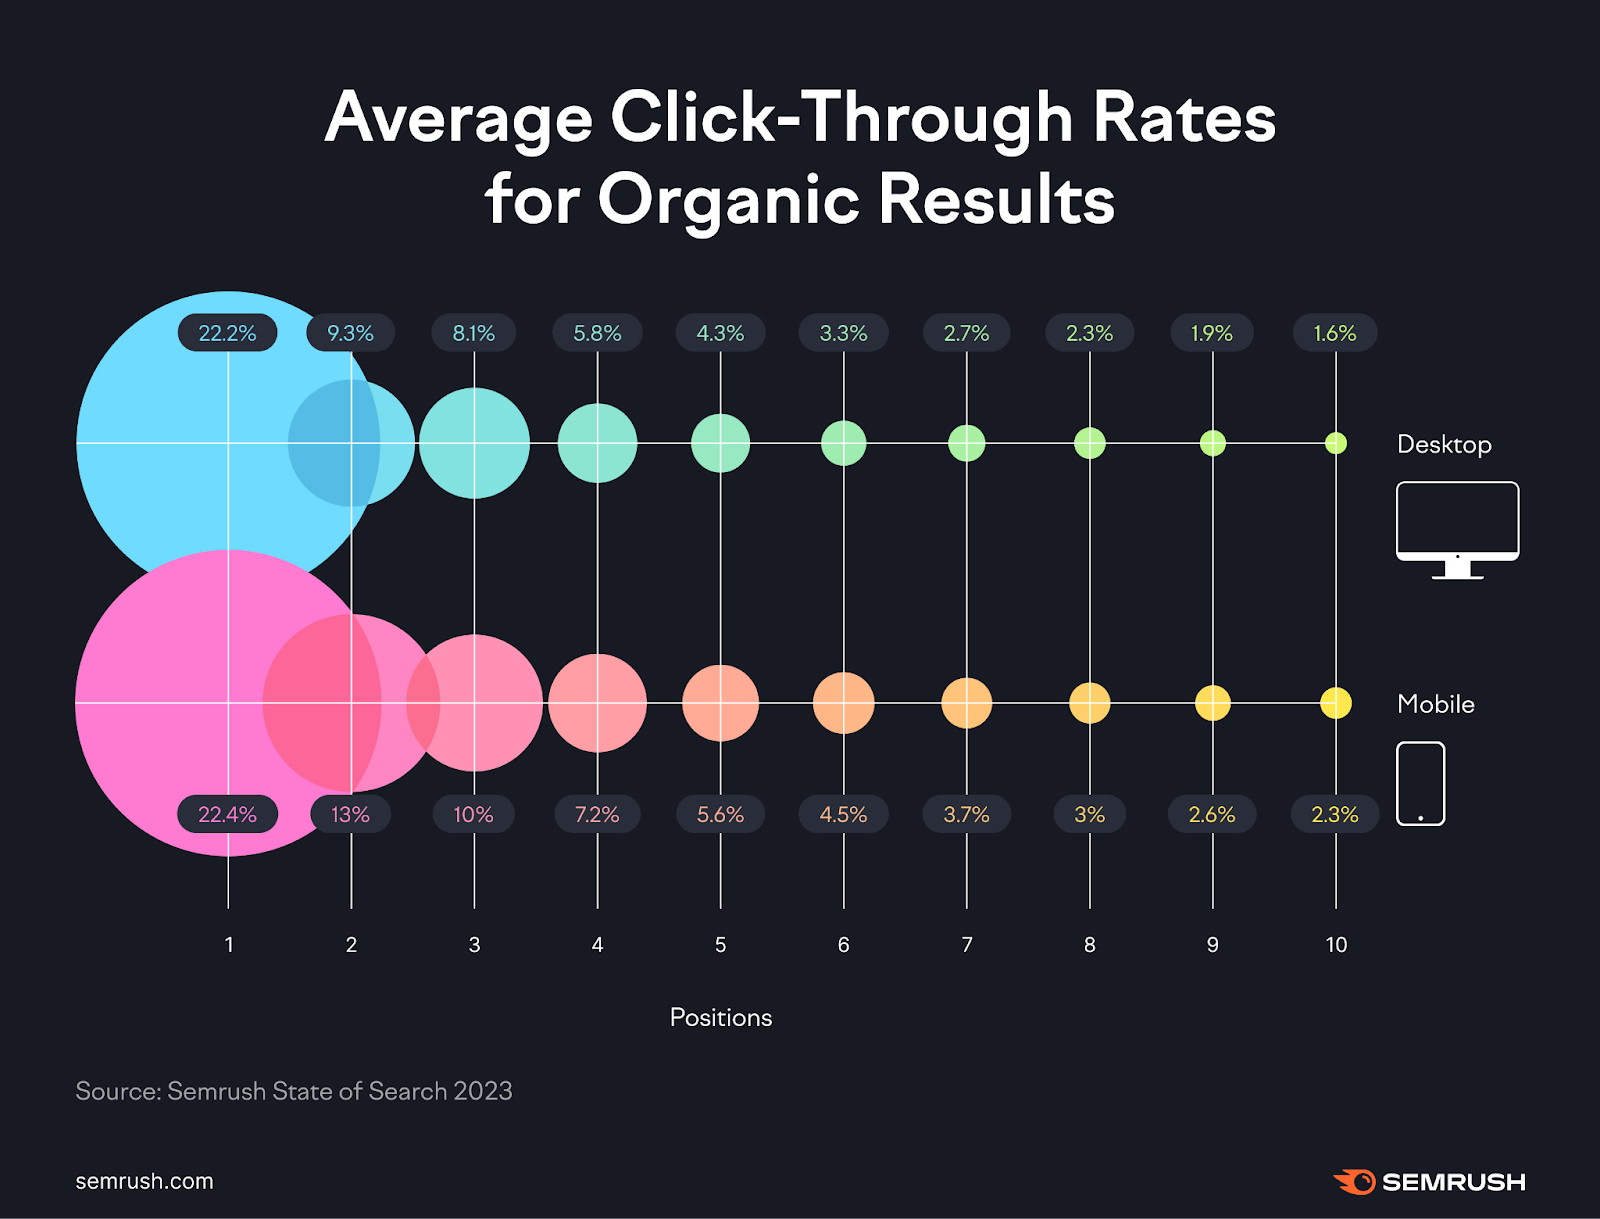 Semrush data showing average click-through rates for organic results